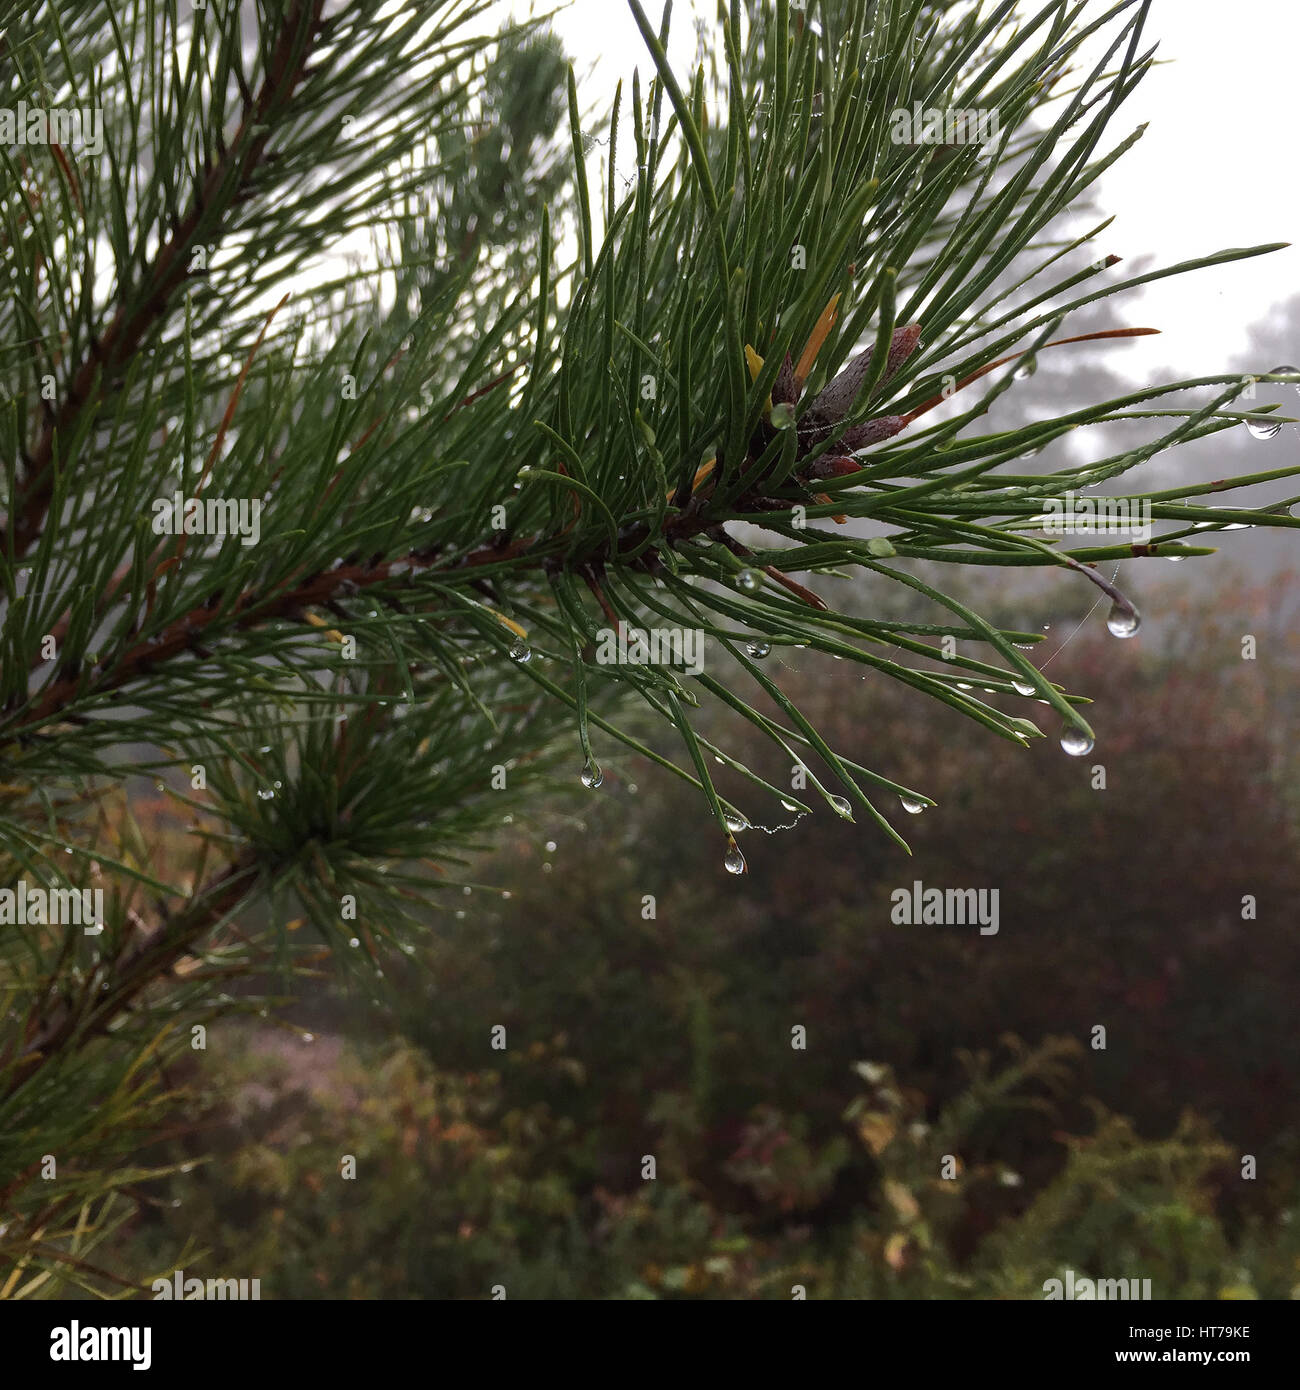 Closeup of a dew-laden pine branch Stock Photo